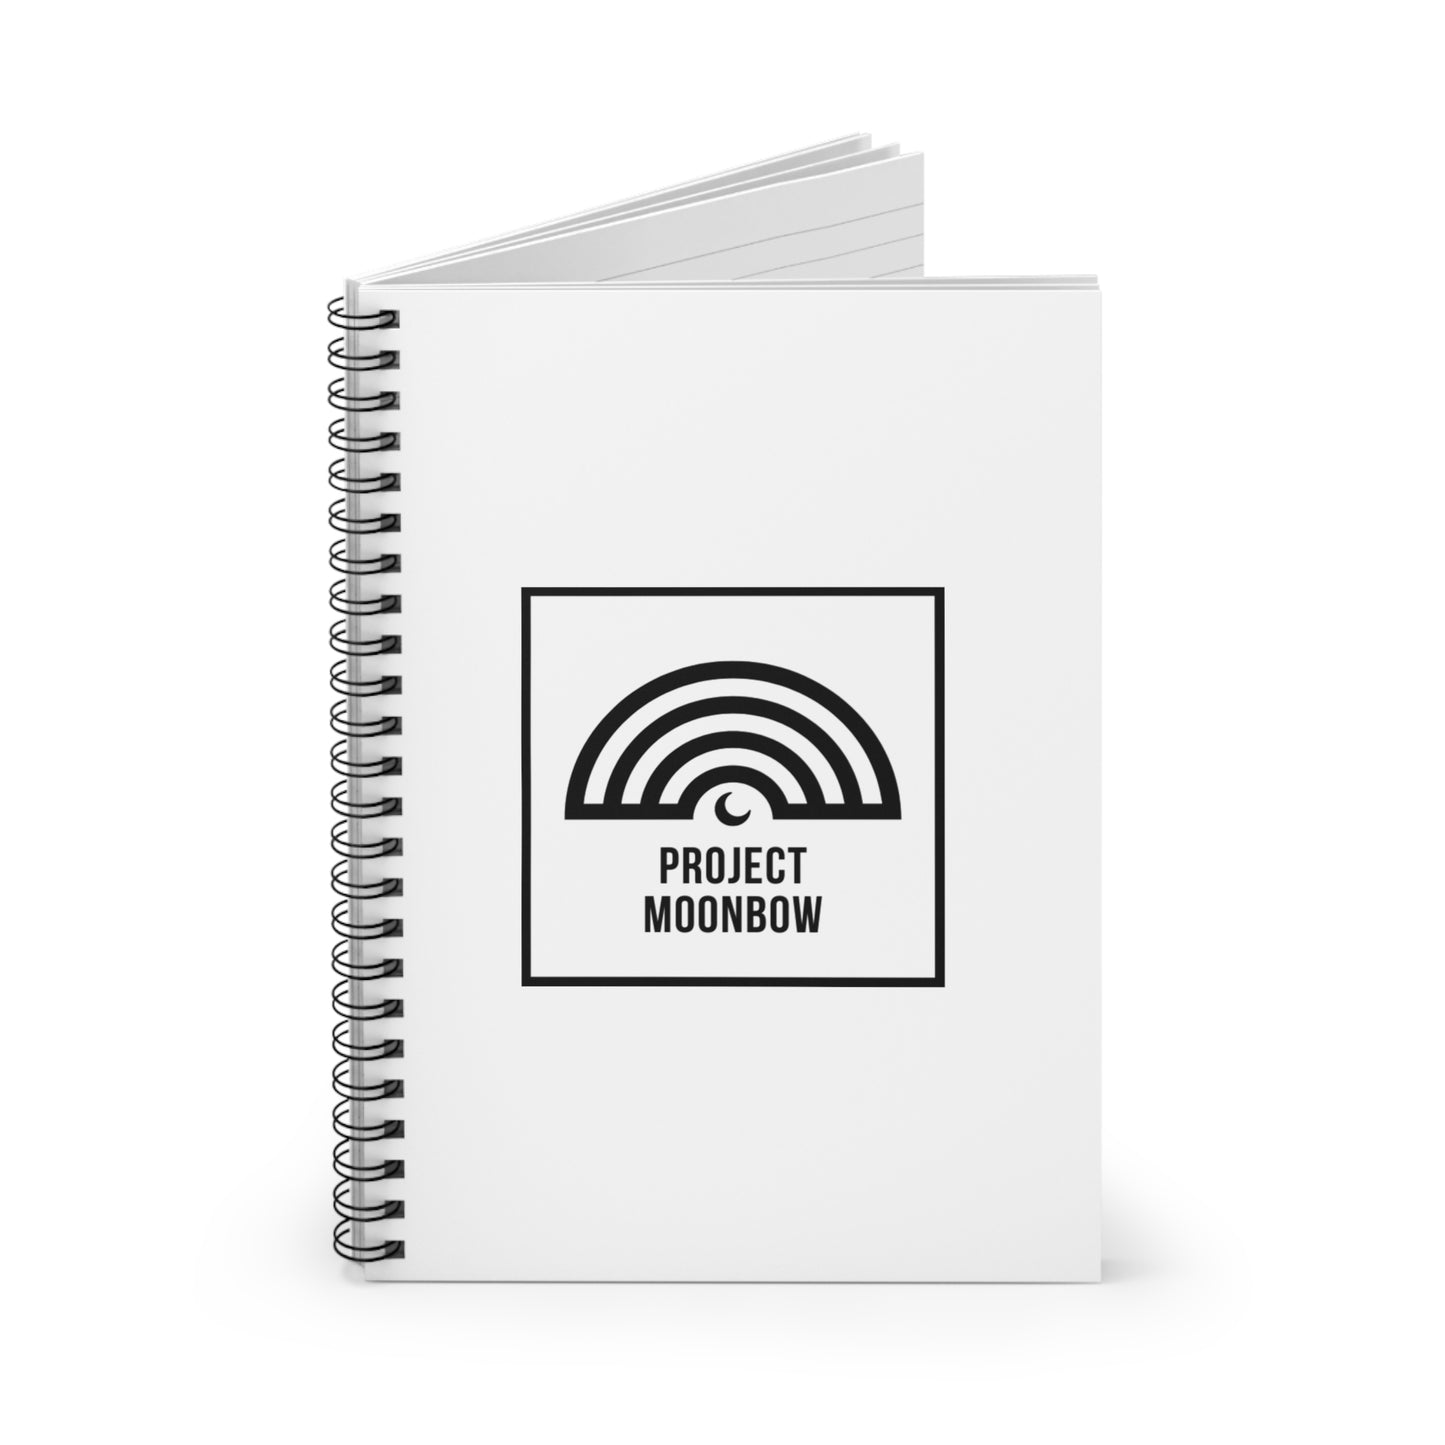 Project Moonbow Spiral Notebook - Ruled Line, Journal, Notepad, Notebook